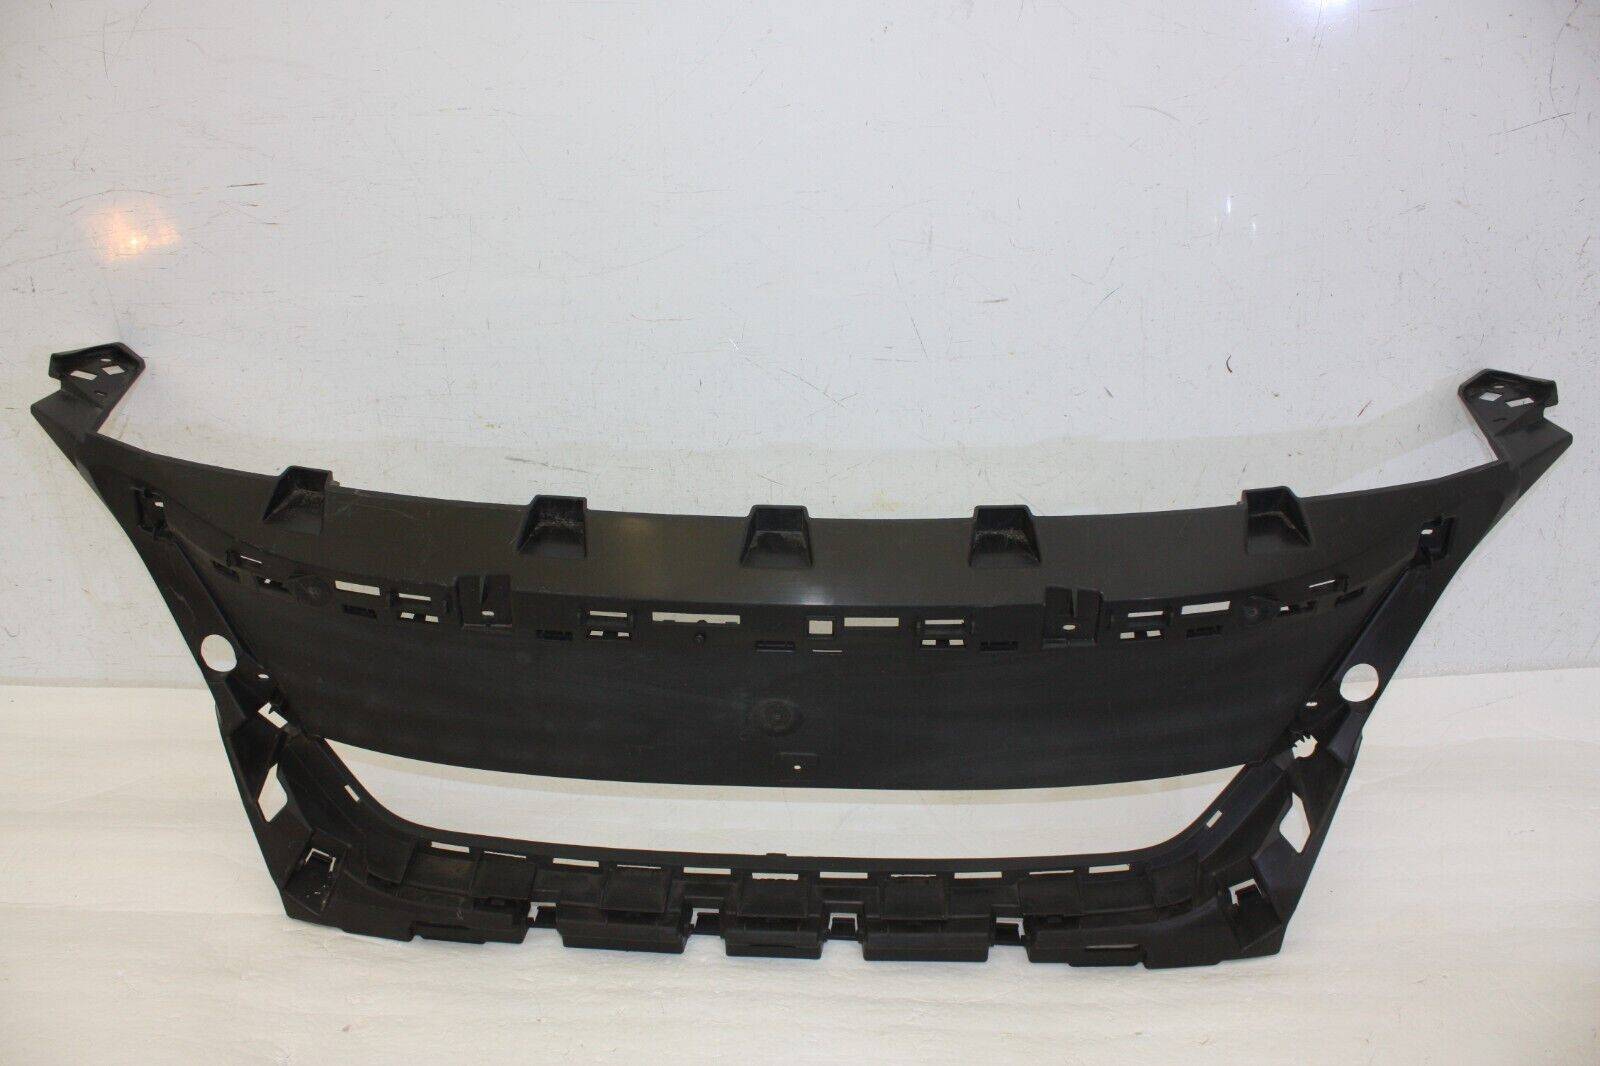 Peugeot 3008 Front Bumper Grill Bracket 2017 to 2021 9815317777 Genuine 176268720878